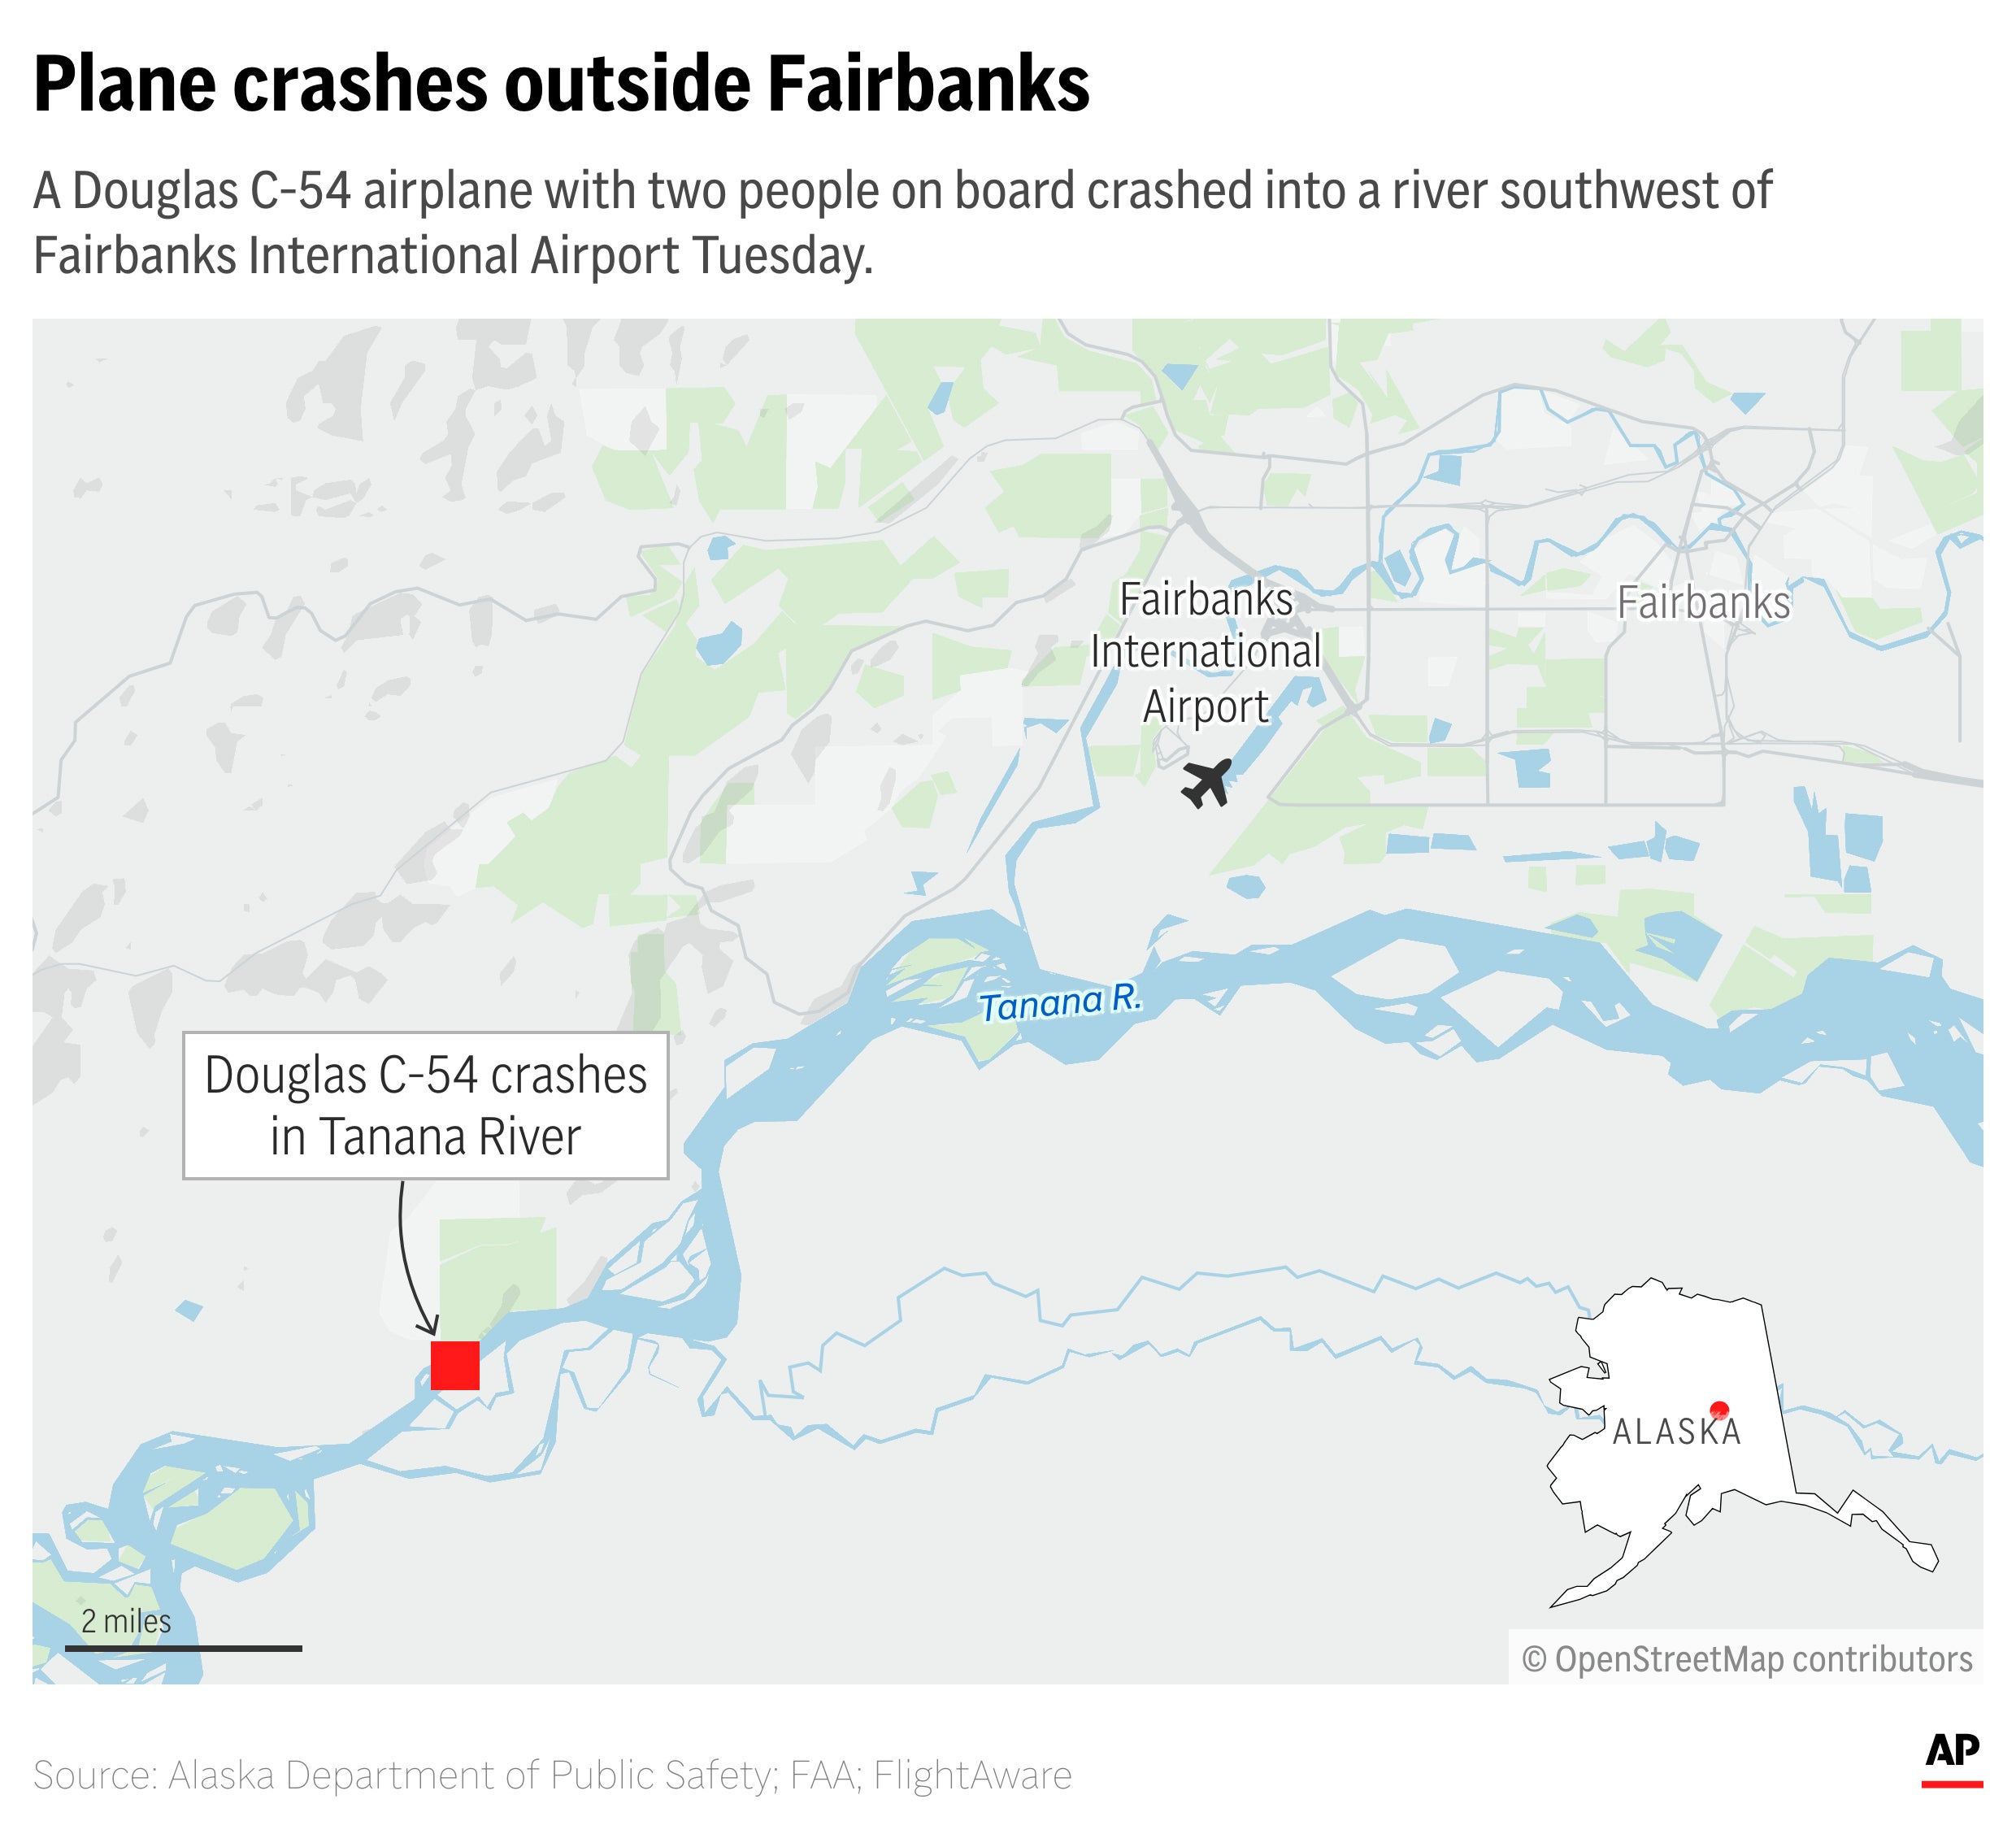 The plane, a Douglas DC-4, was carrying two people when it crashed on Tuesday morning, shortly after taking off from Fairbanks International Airport